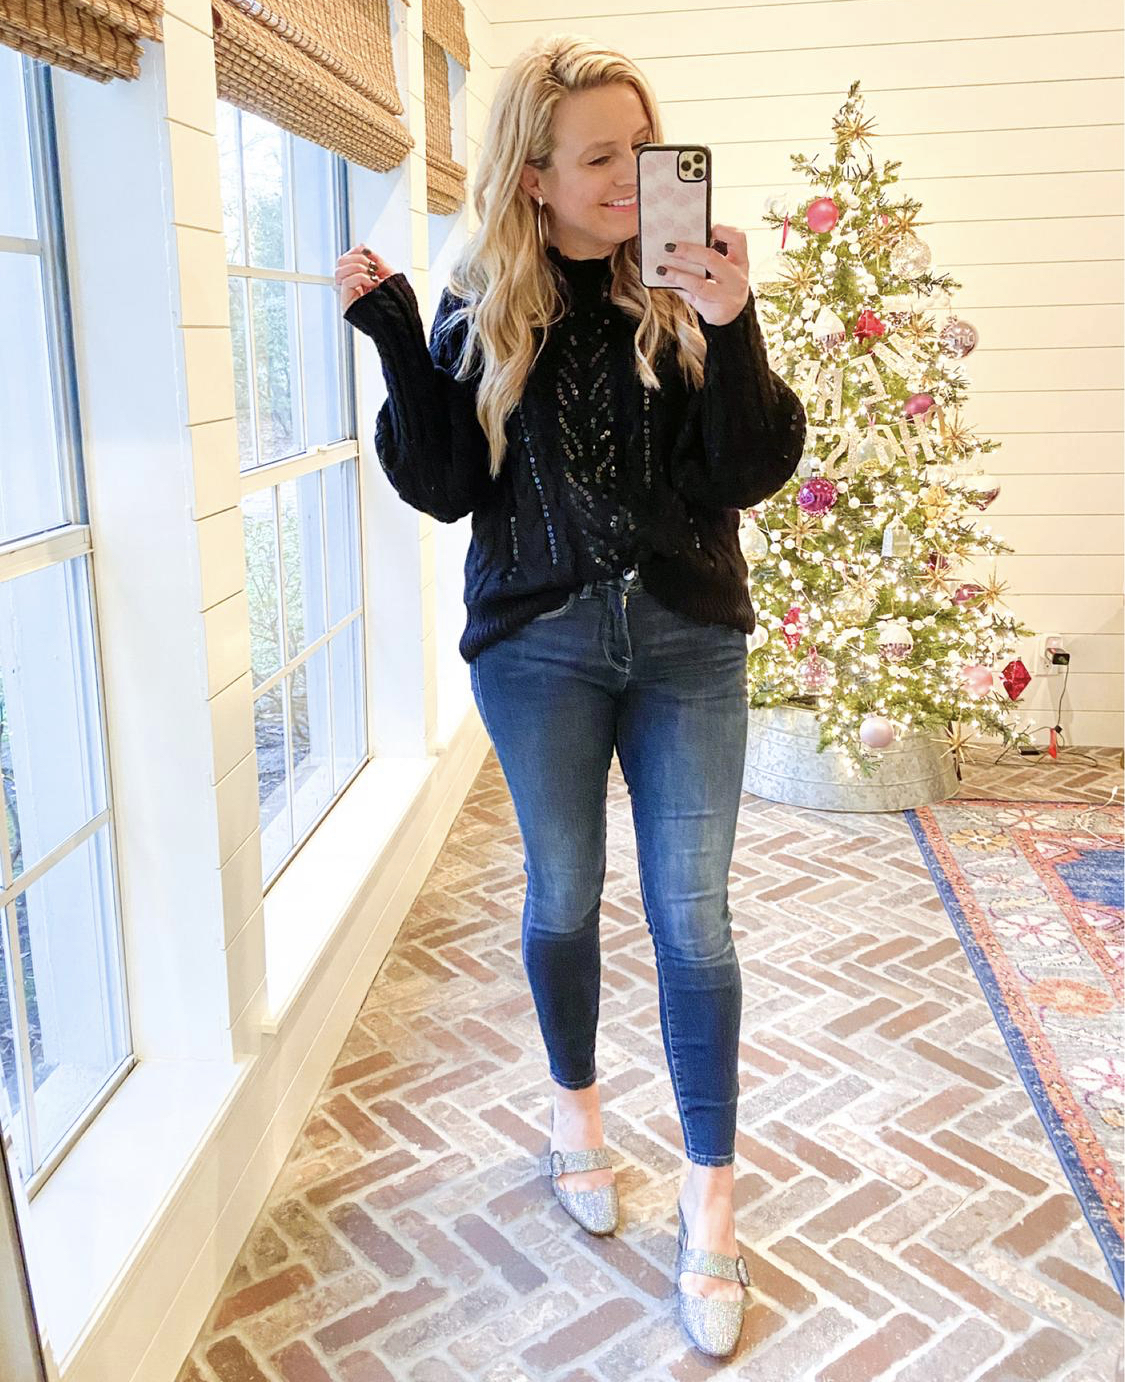 December Outfits by popular Houston fashion blog, Fancy Ashley: image of a woman standing in front of a Christmas tree decorated with pink, white and silver ornaments and wearing a black sequin sweater, jeans, and Sarah Jessica Parker sliver slide heel shoes. 